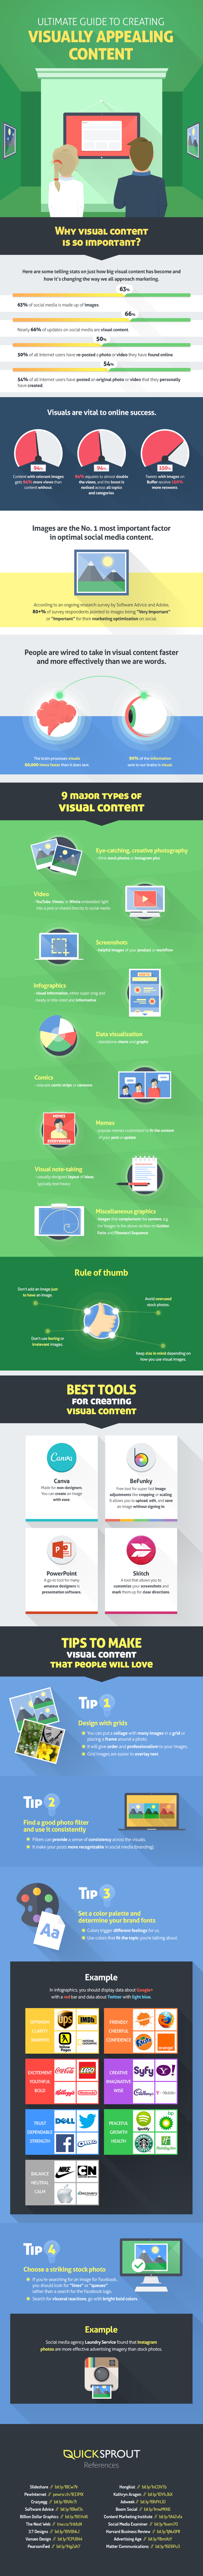 A Guide to Creating Visually Appealing Content Infographic image